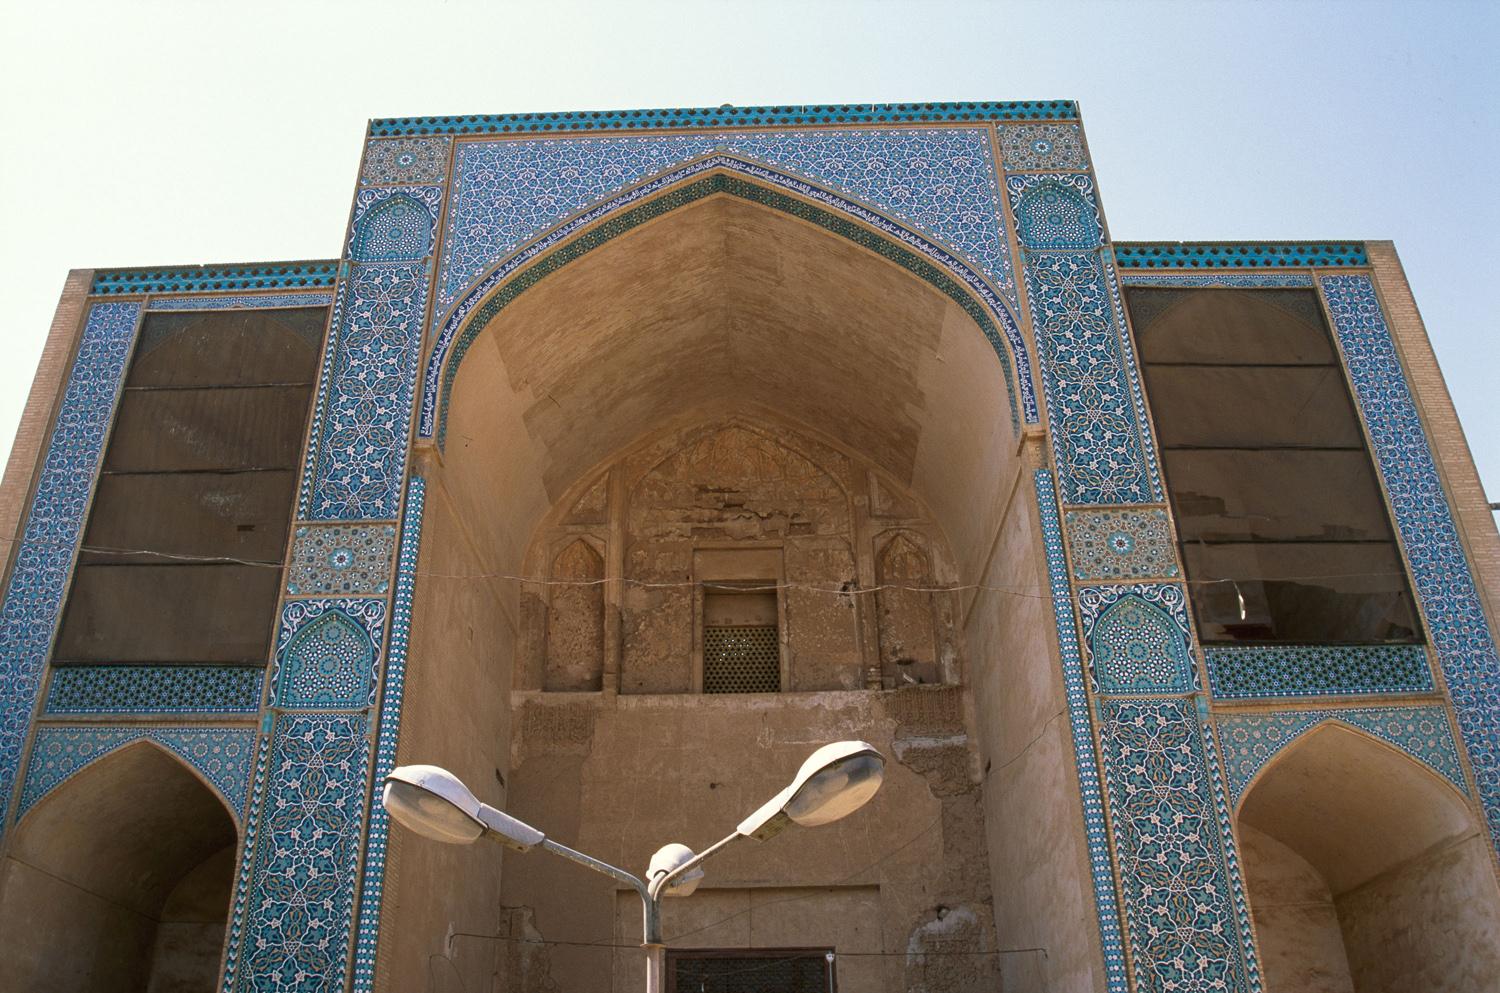 View of the iwan, with recent tilework